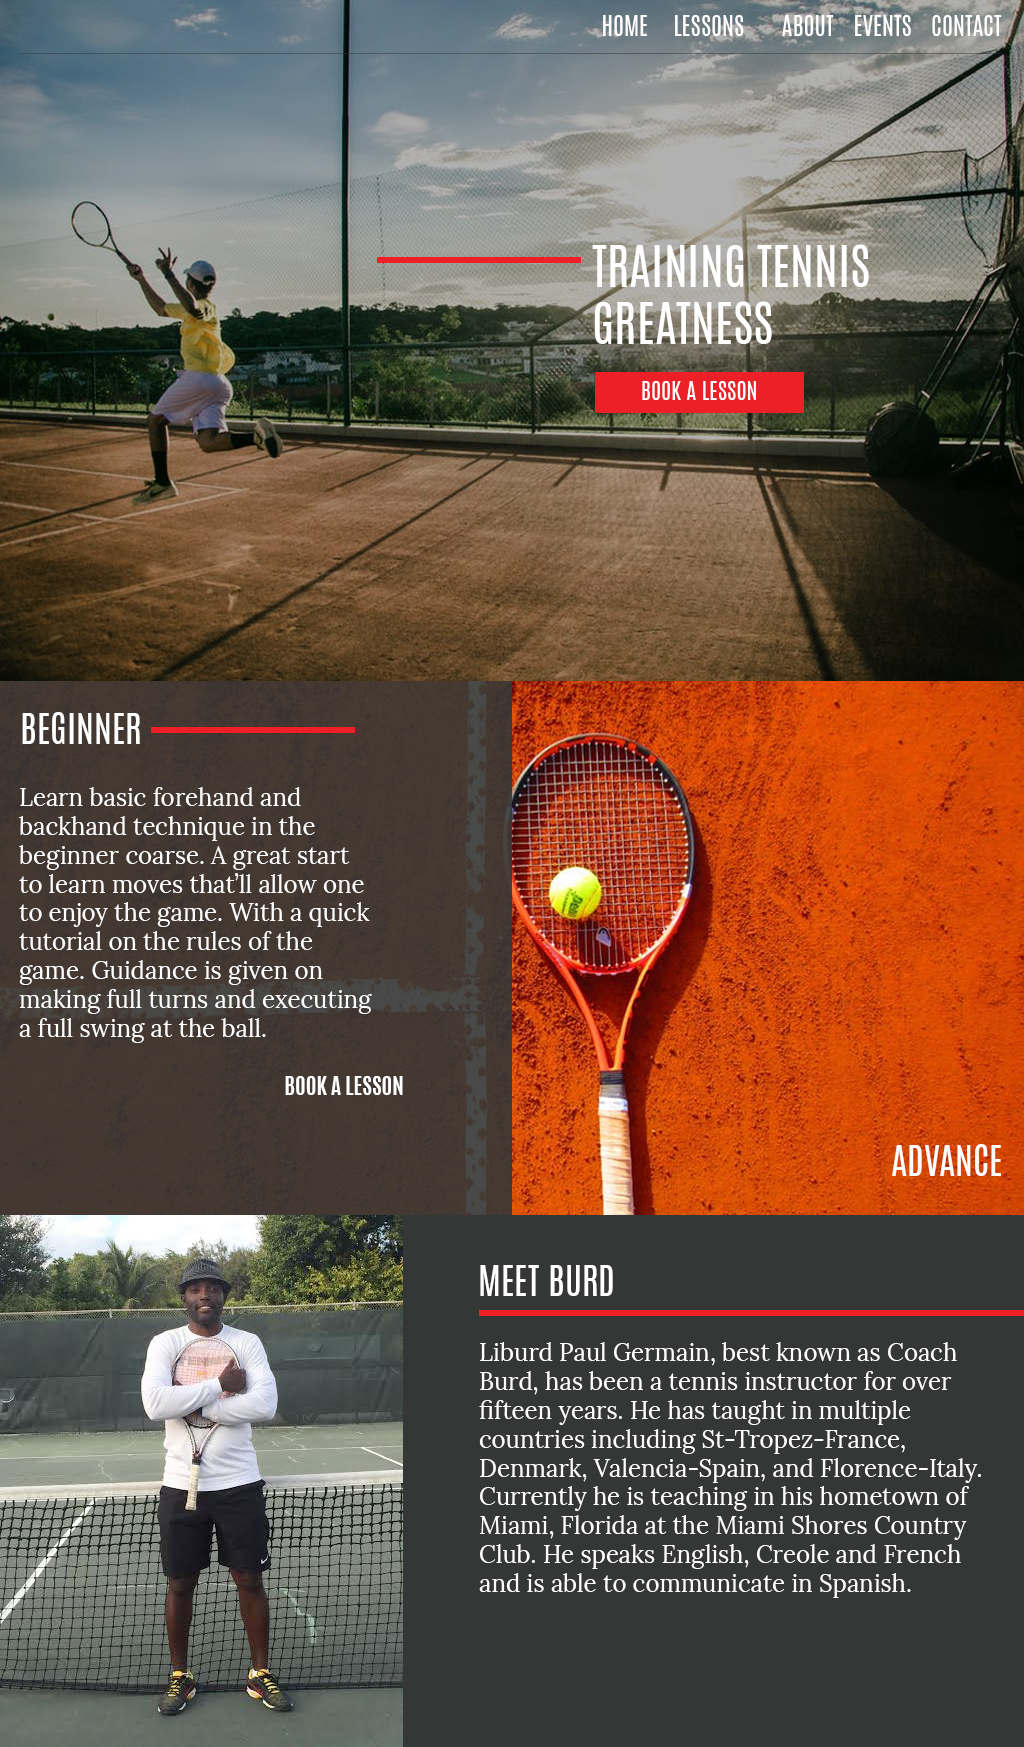 Full page view of the home page of the tennis website designed by Katherine Delorme